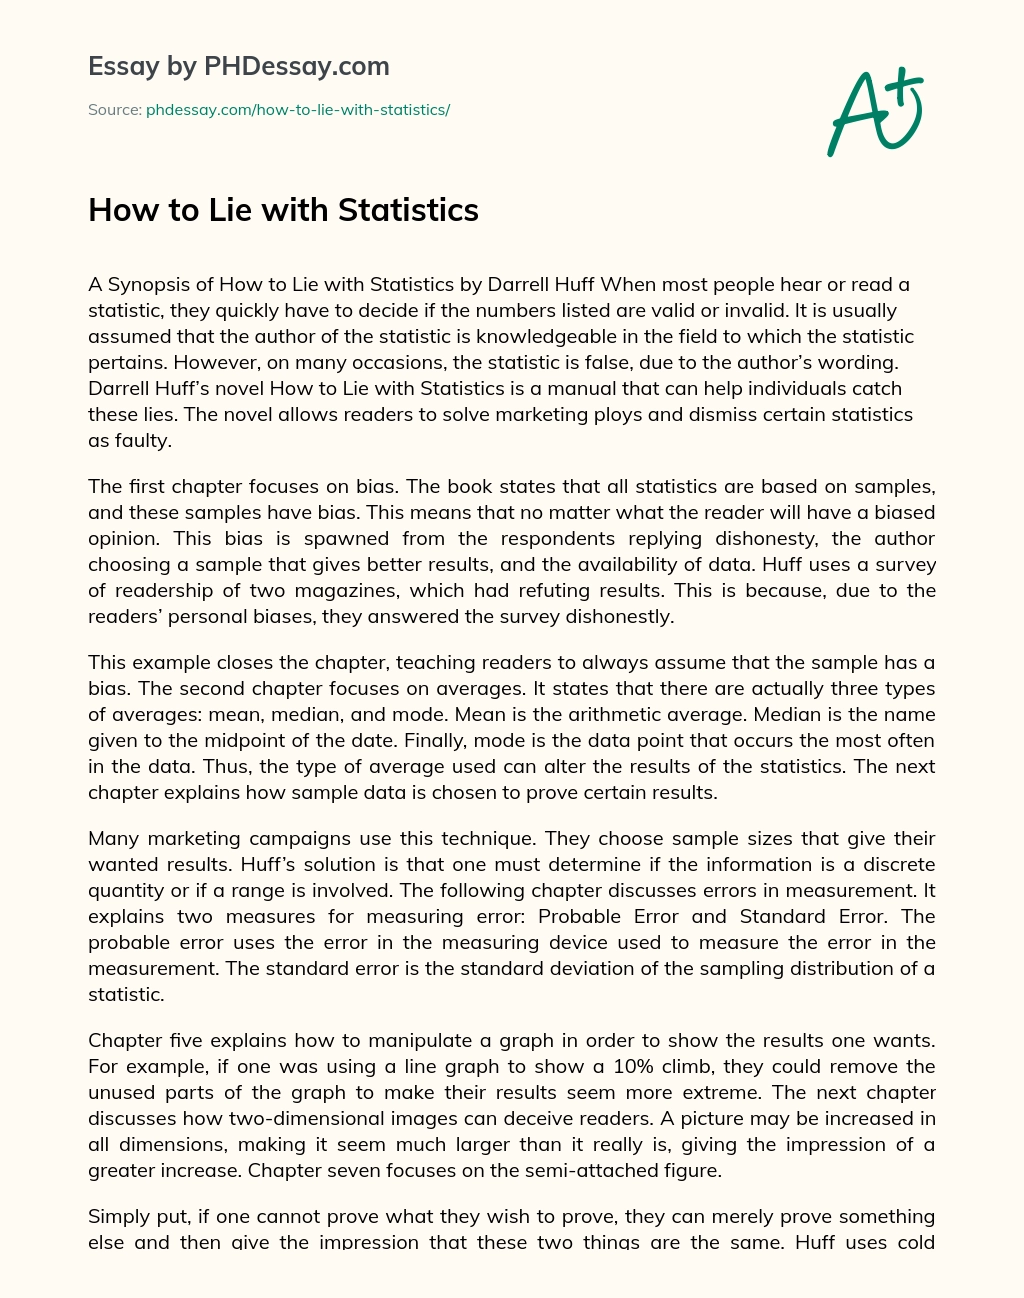 how to lie with statistics summary